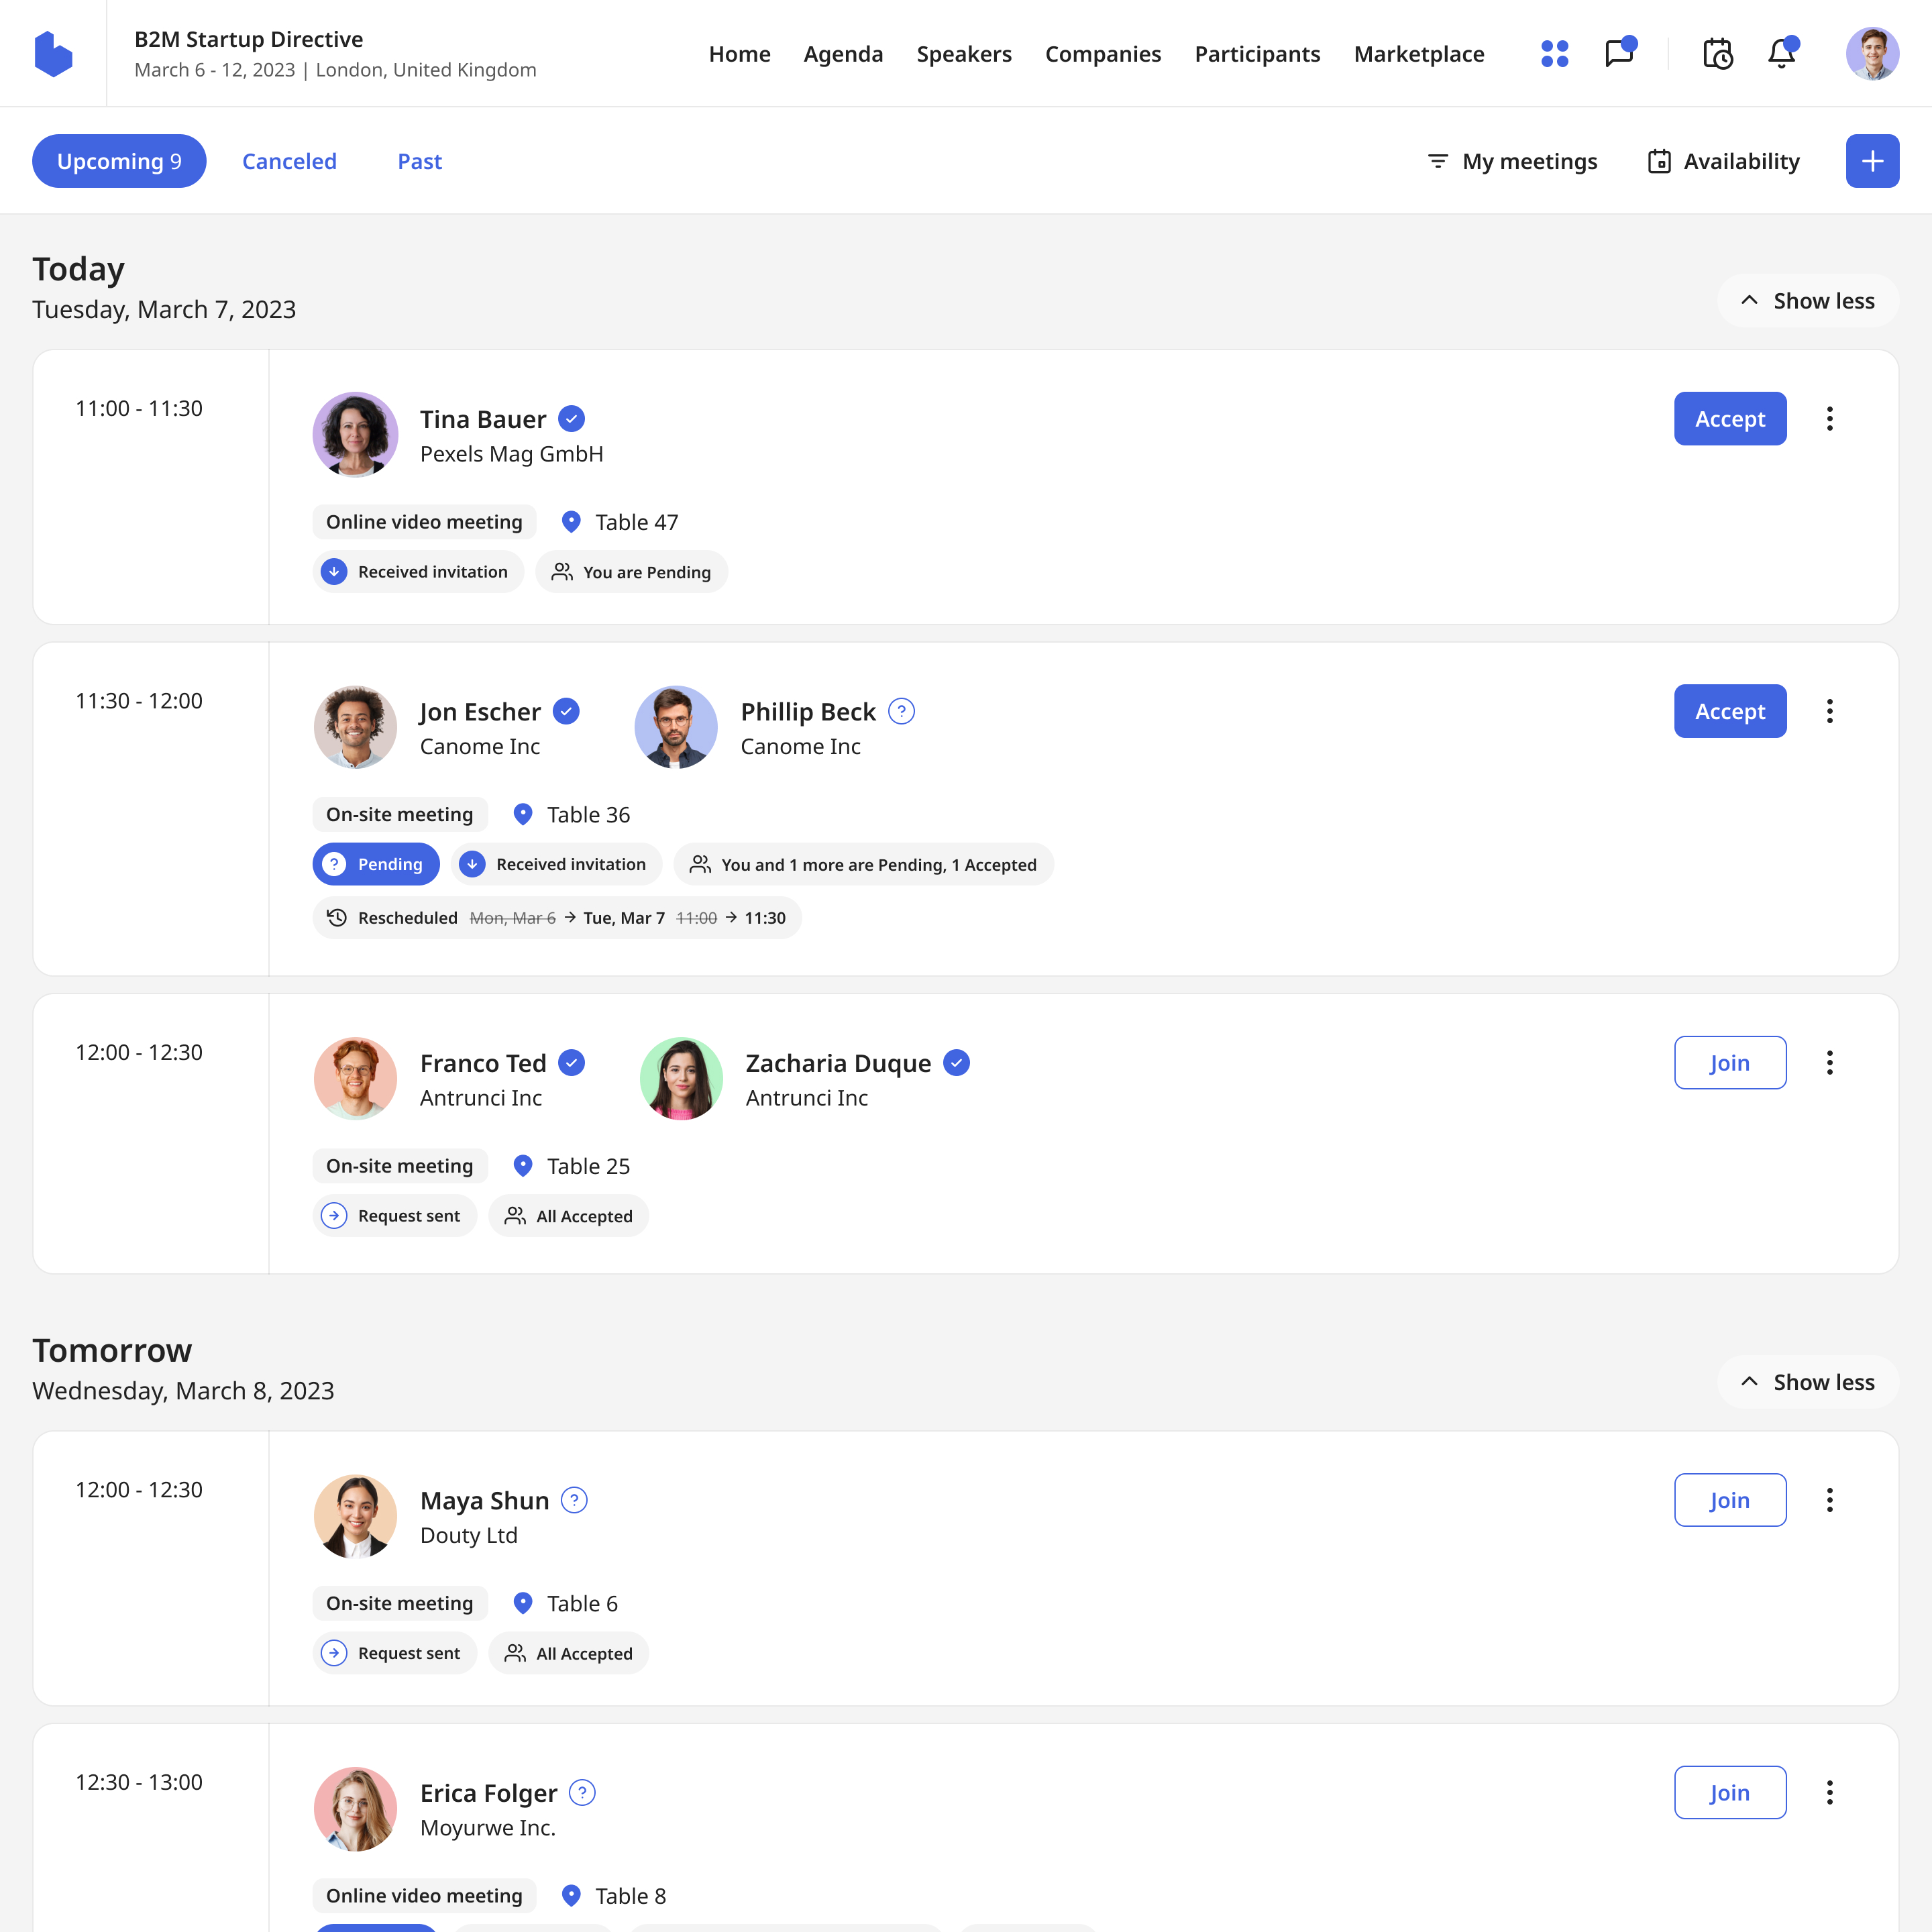 Participants can engage with multiple participants in in-person or online meetings. Time slots organized in meeting blocks ensure efficient scheduling. By specifying their available slots, participants schedule meetings based on their mutual availability.